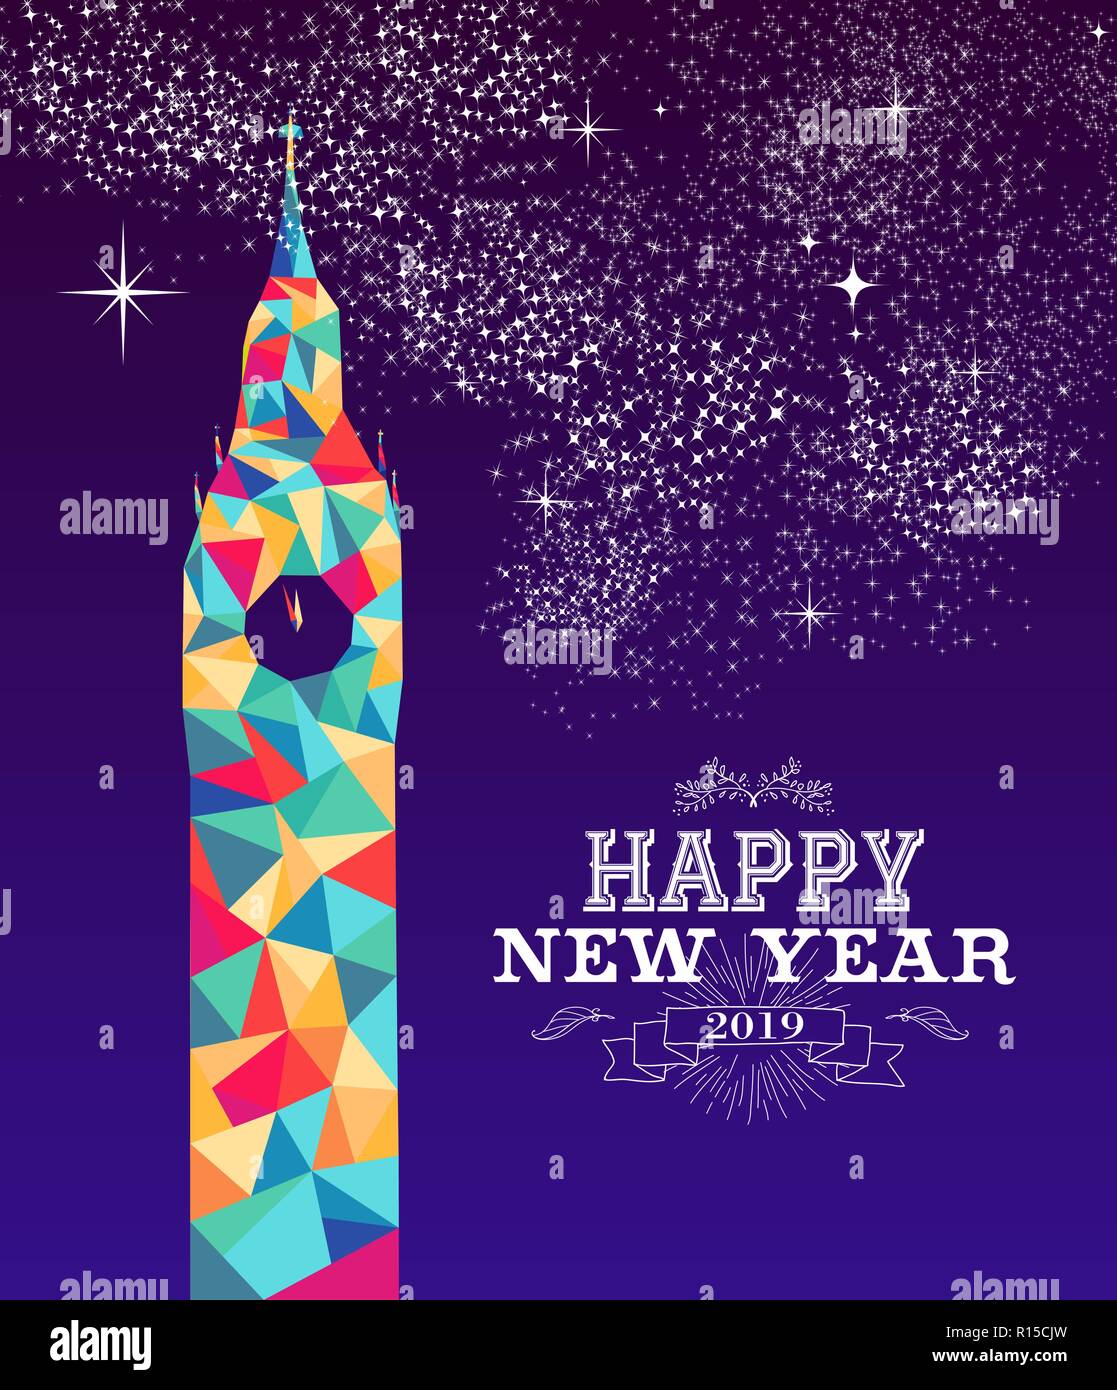 Happy new year 2019 greeting card or poster design with colorful triangle England monument and vintage label illustration. EPS10 vector. Stock Vector